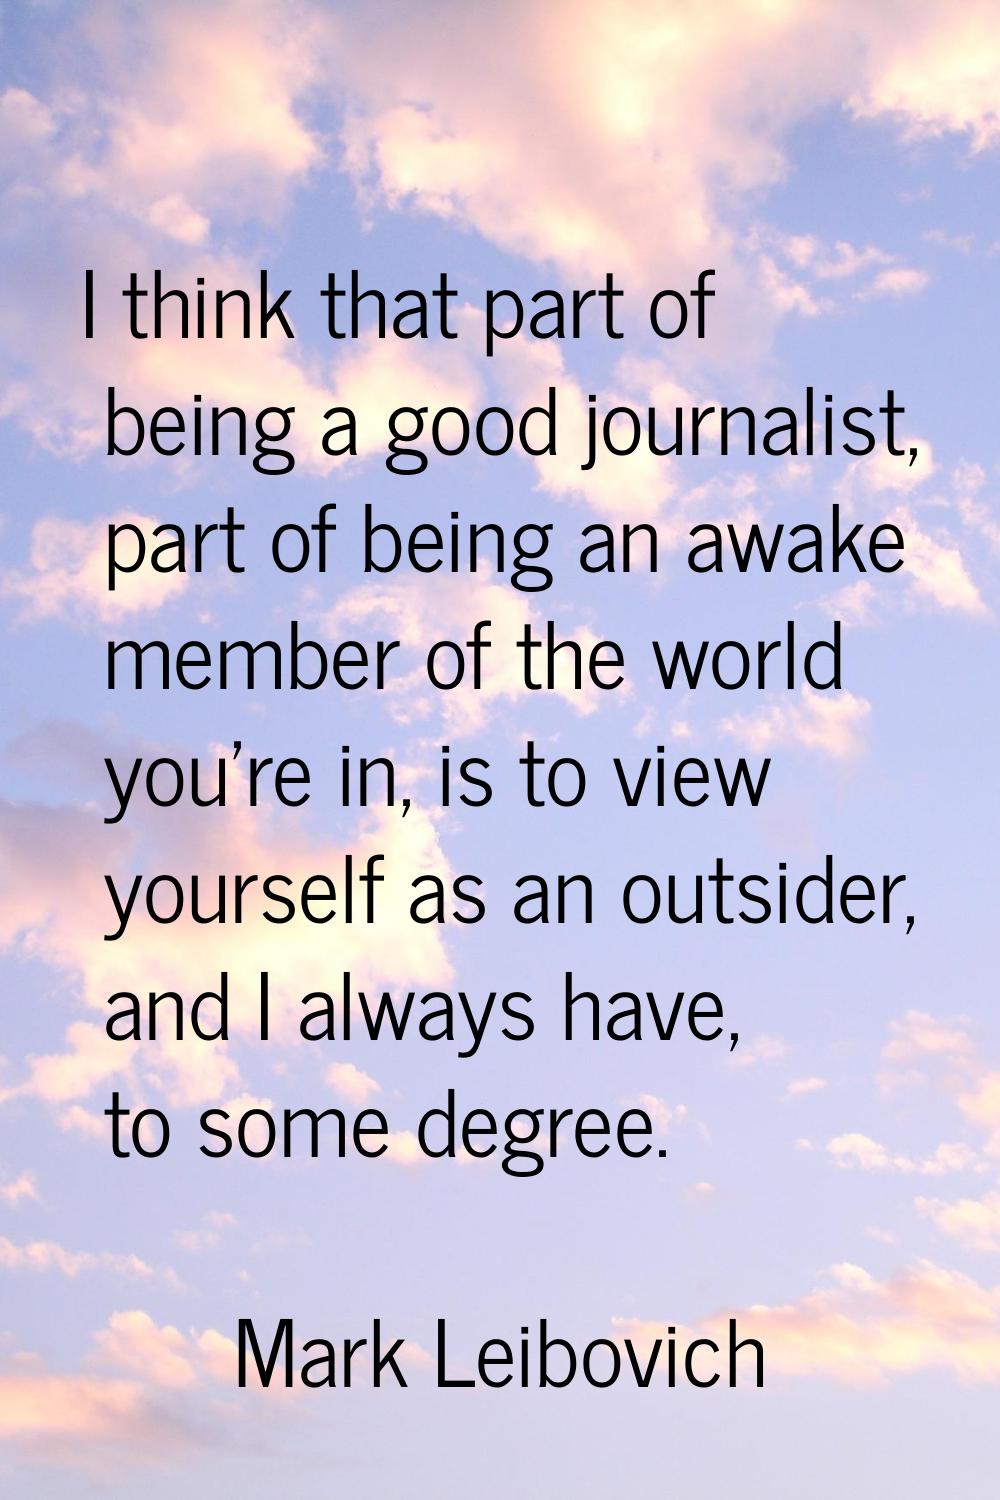 I think that part of being a good journalist, part of being an awake member of the world you're in,